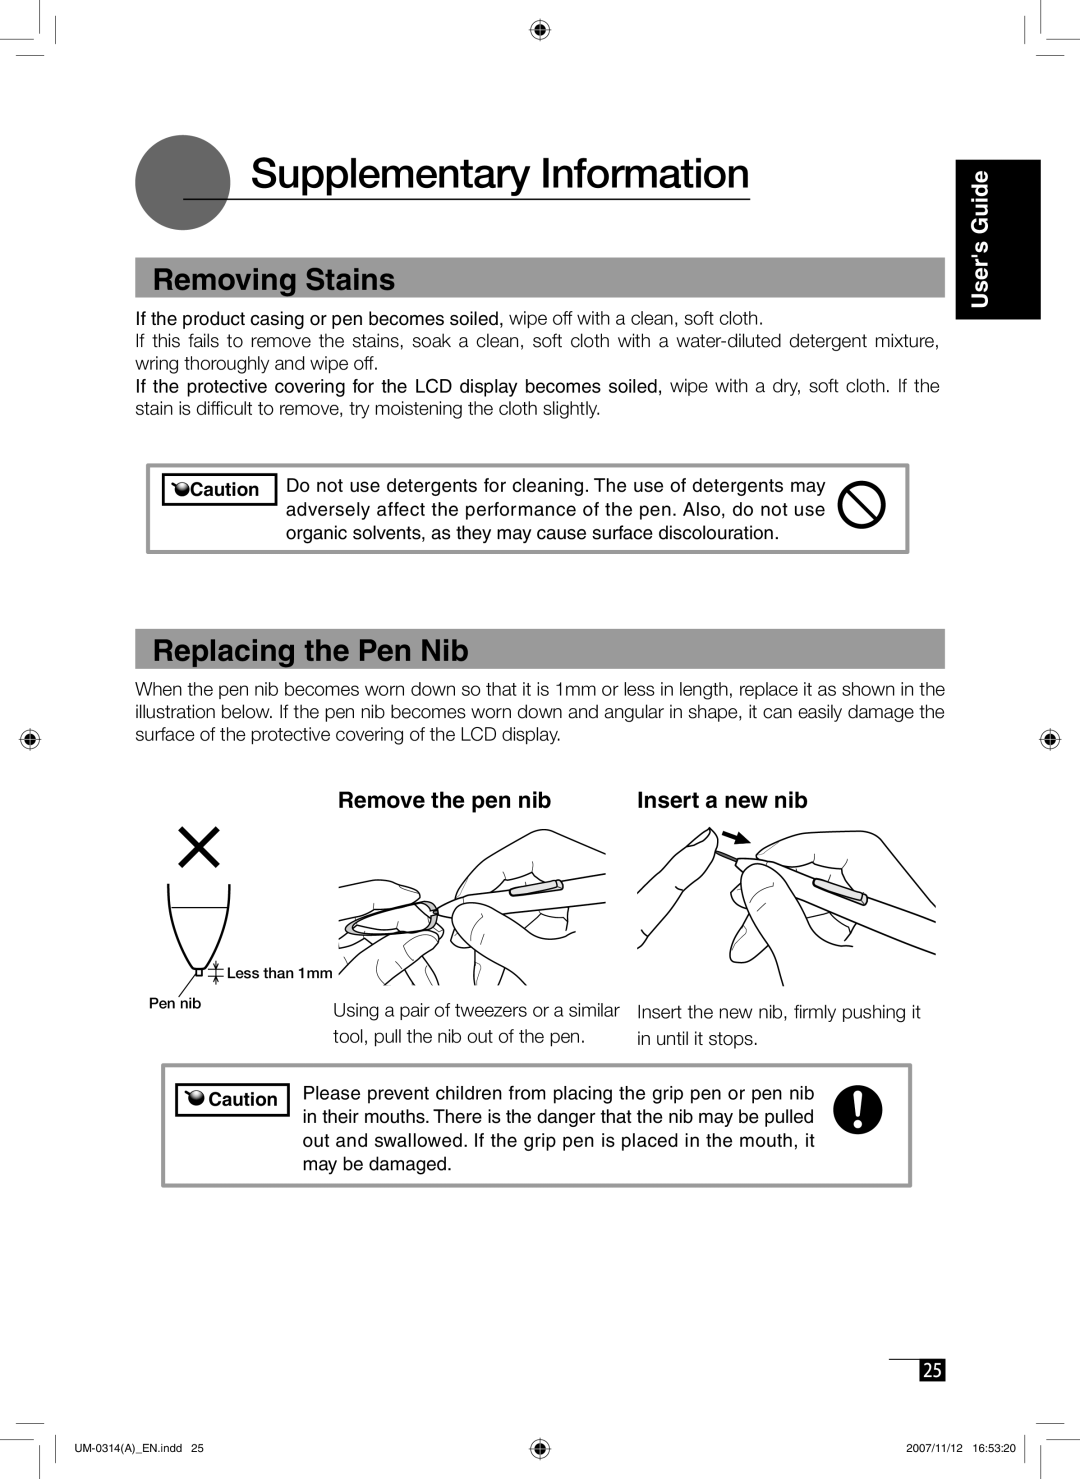 Wacom DTI-520 manual Supplementary Information, Removing Stains, Replacing the Pen Nib, Users Guide 